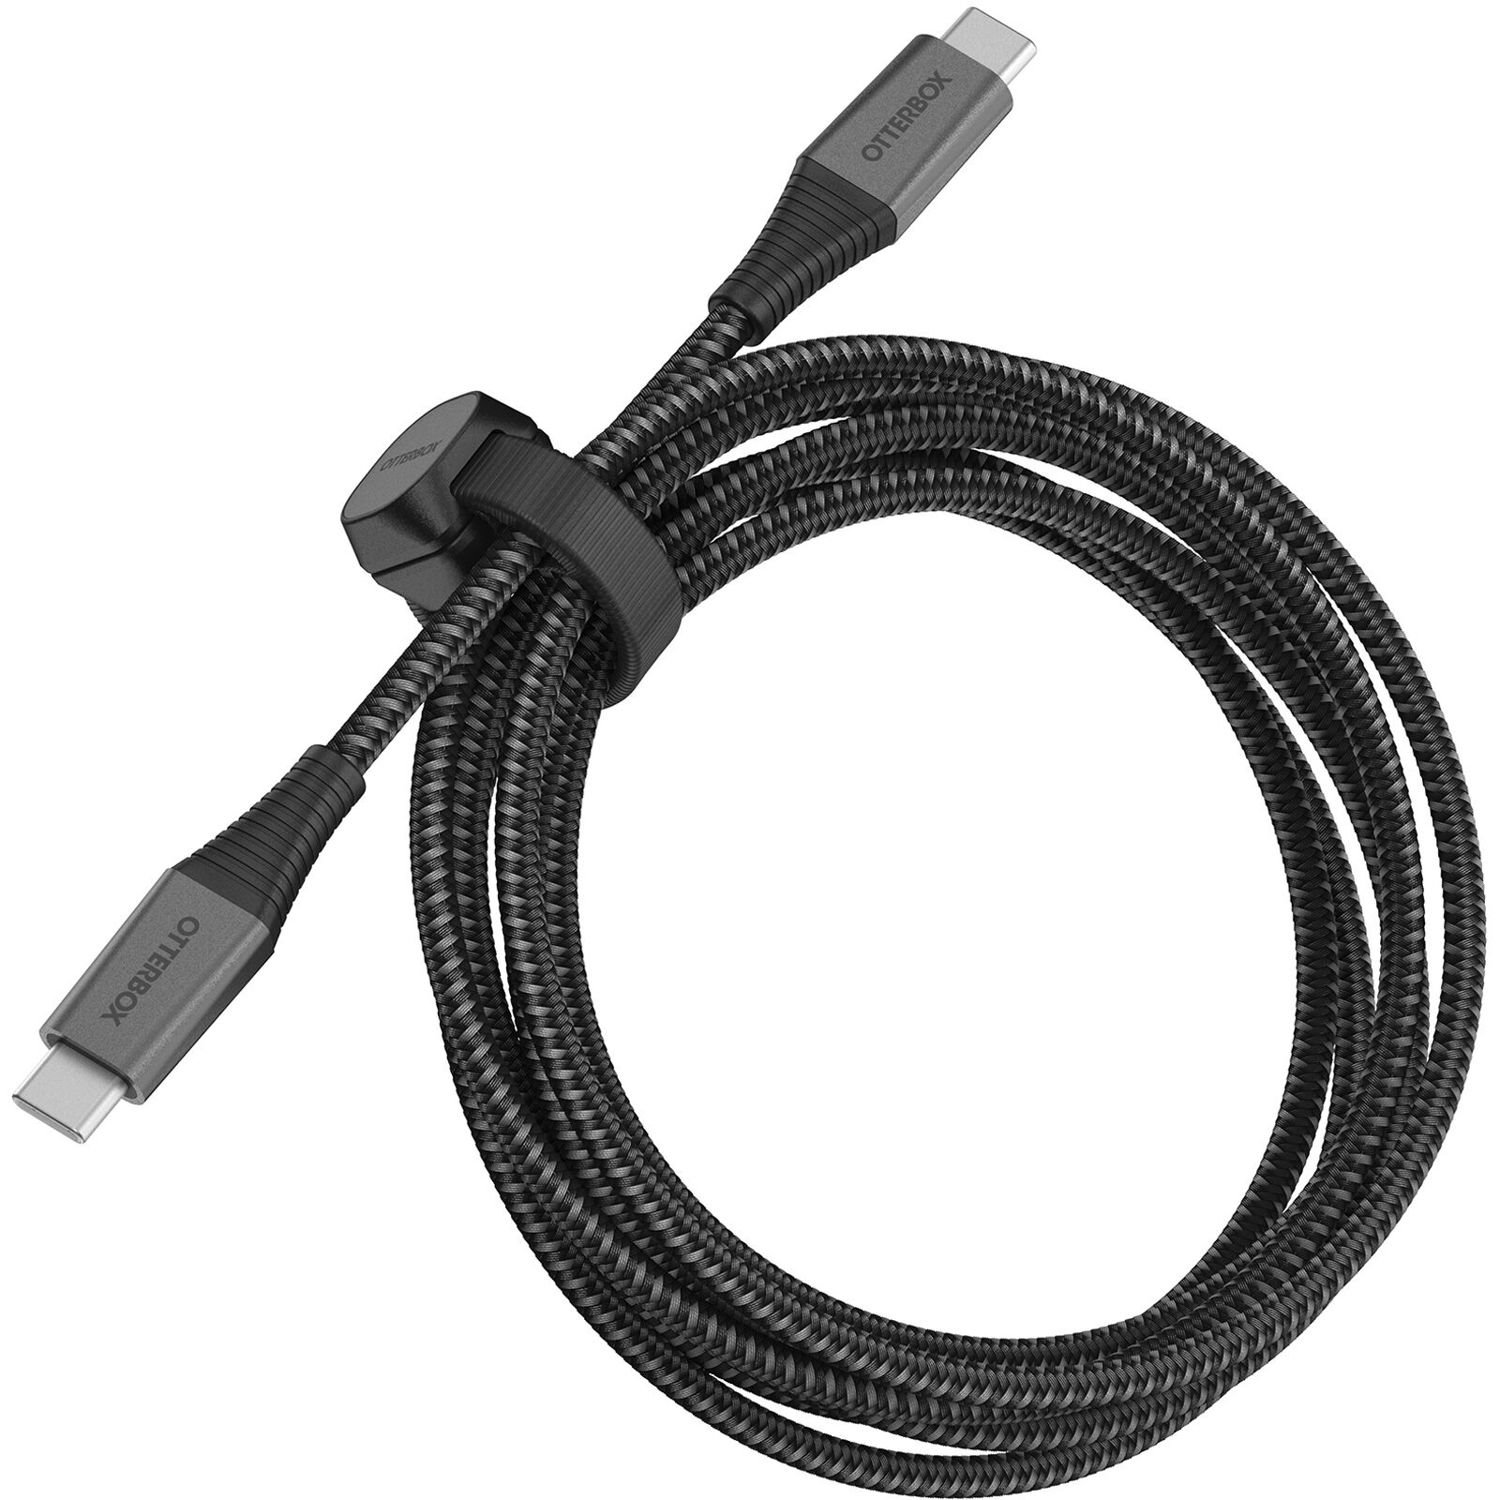 OtterBox Usb-C To Usb-C Premium Pro Fast Charge Cable (2M) - Black (78-80888), Usb PD (60W), Bend/Flex-Tested 30K Times, Braided Nylon, Rugged, Usb-If